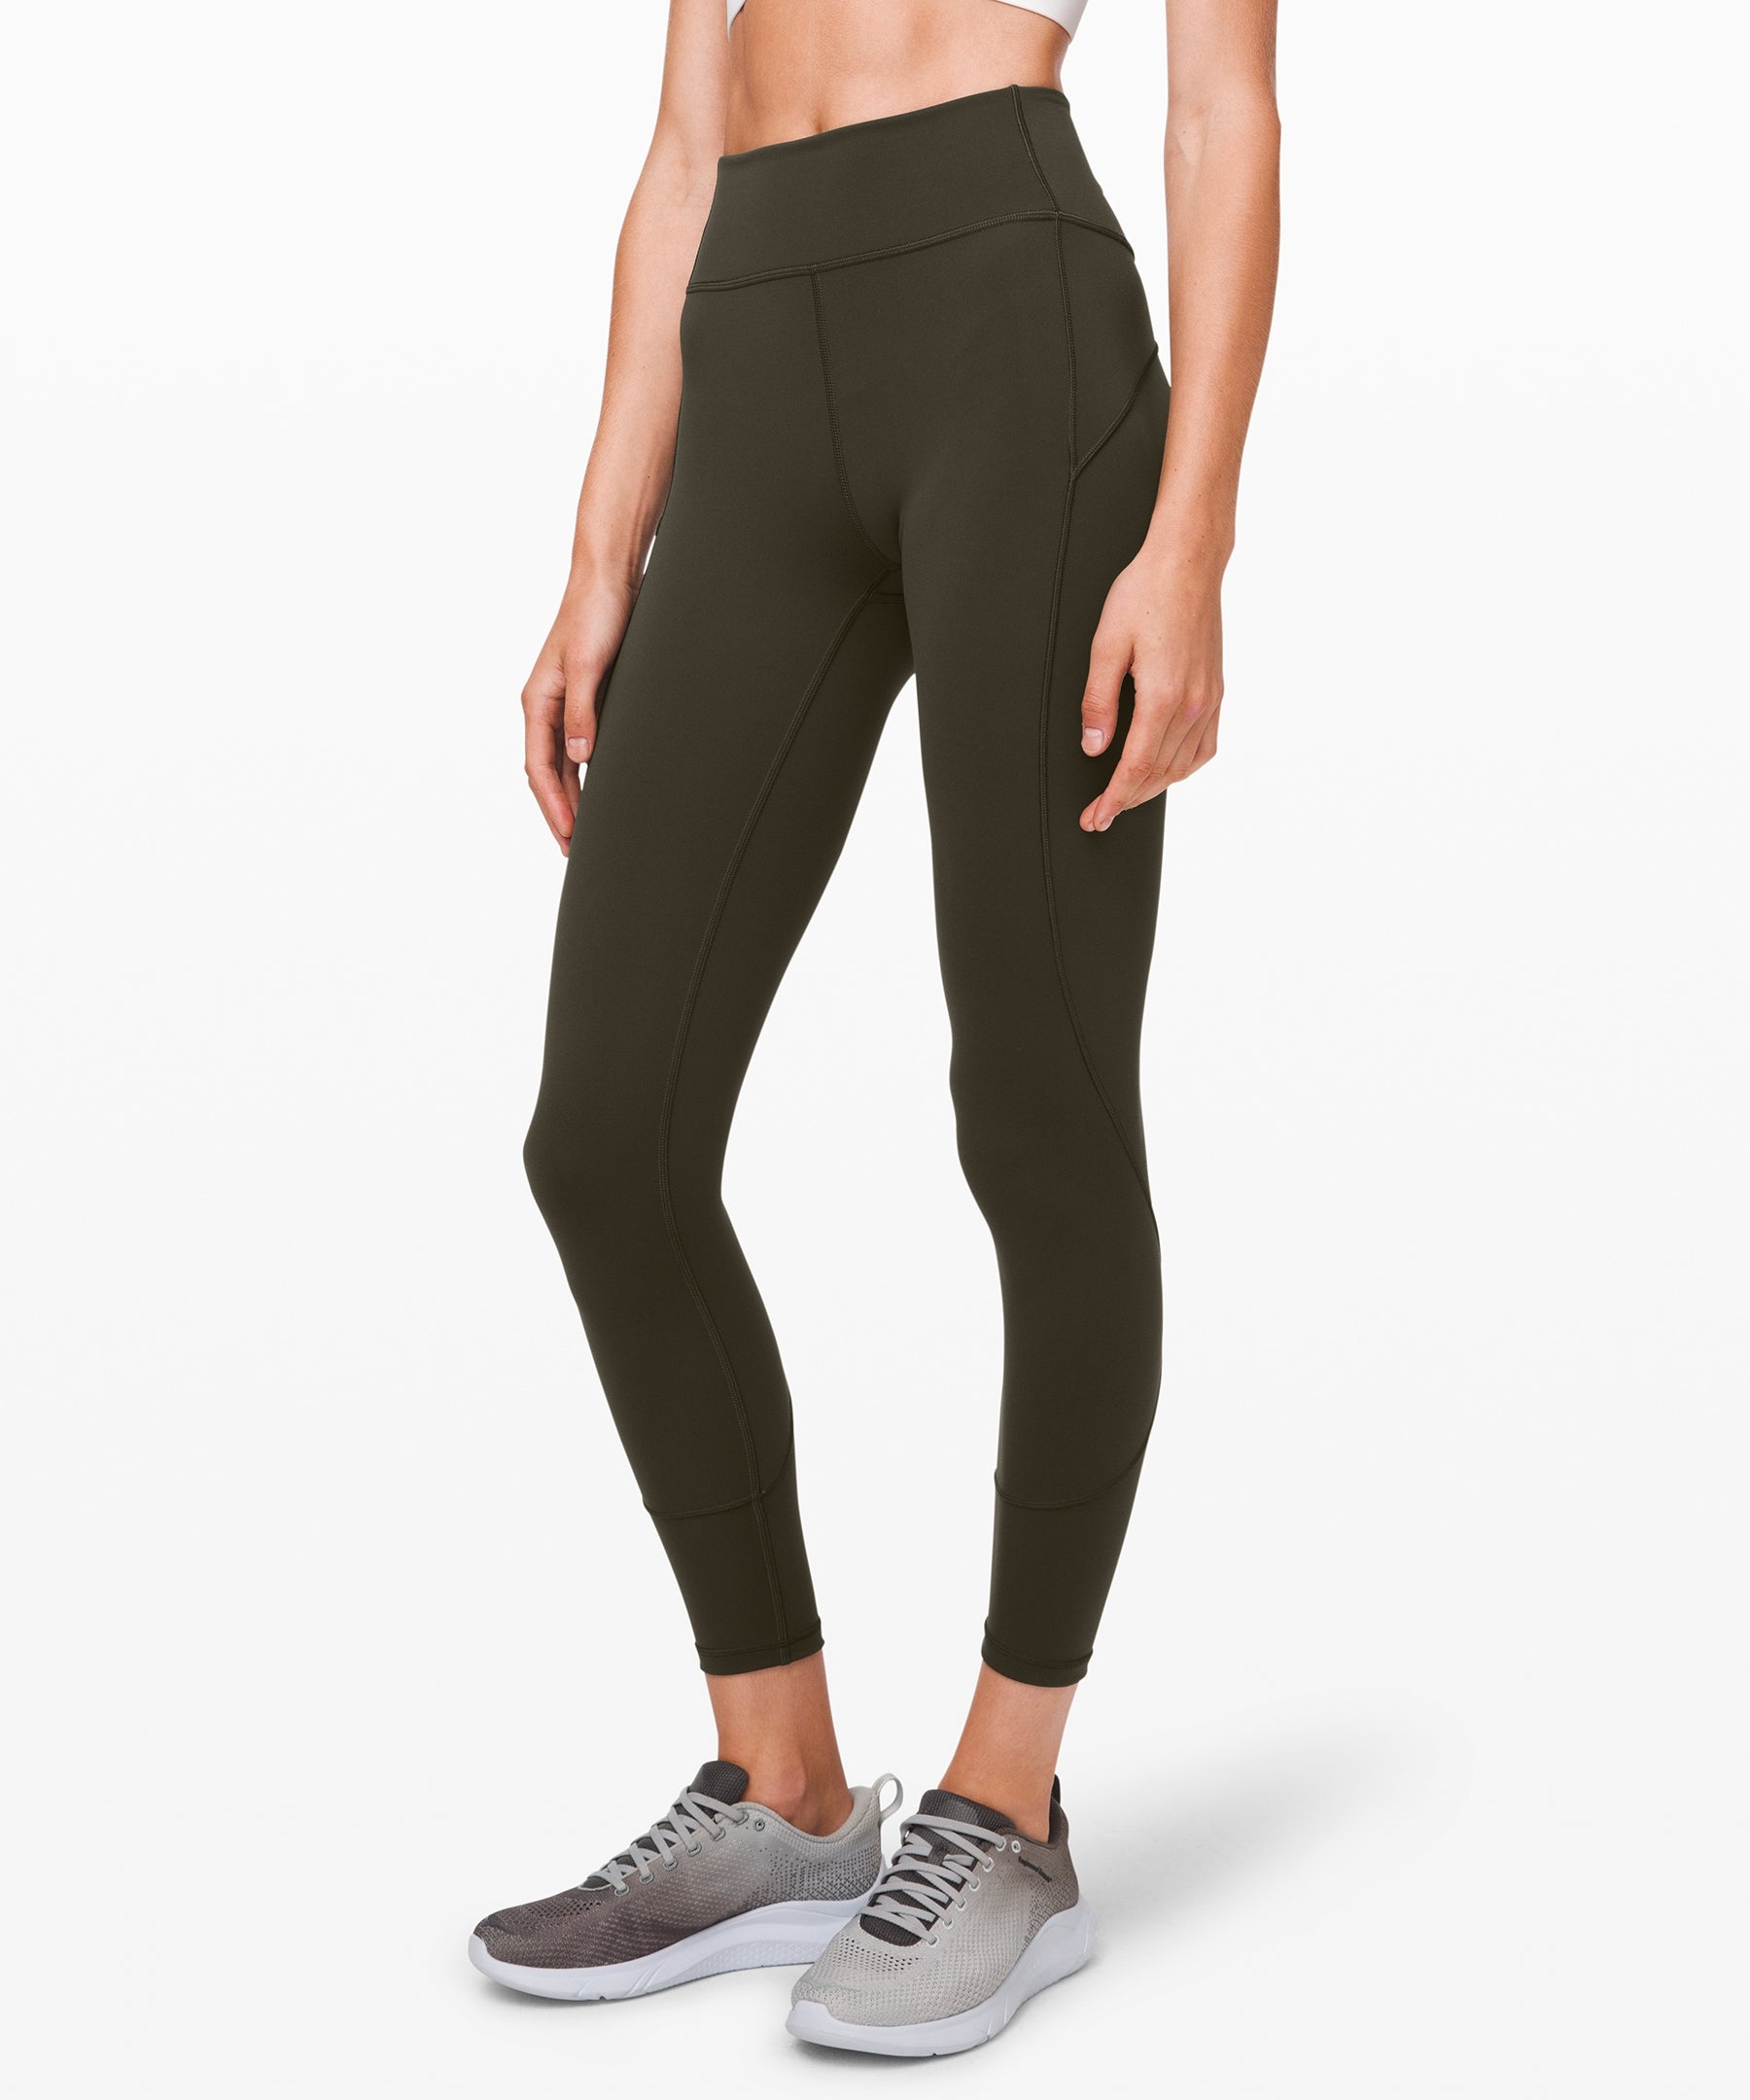 Lululemon In Movement Leggings Discontinued Gm  International Society of  Precision Agriculture